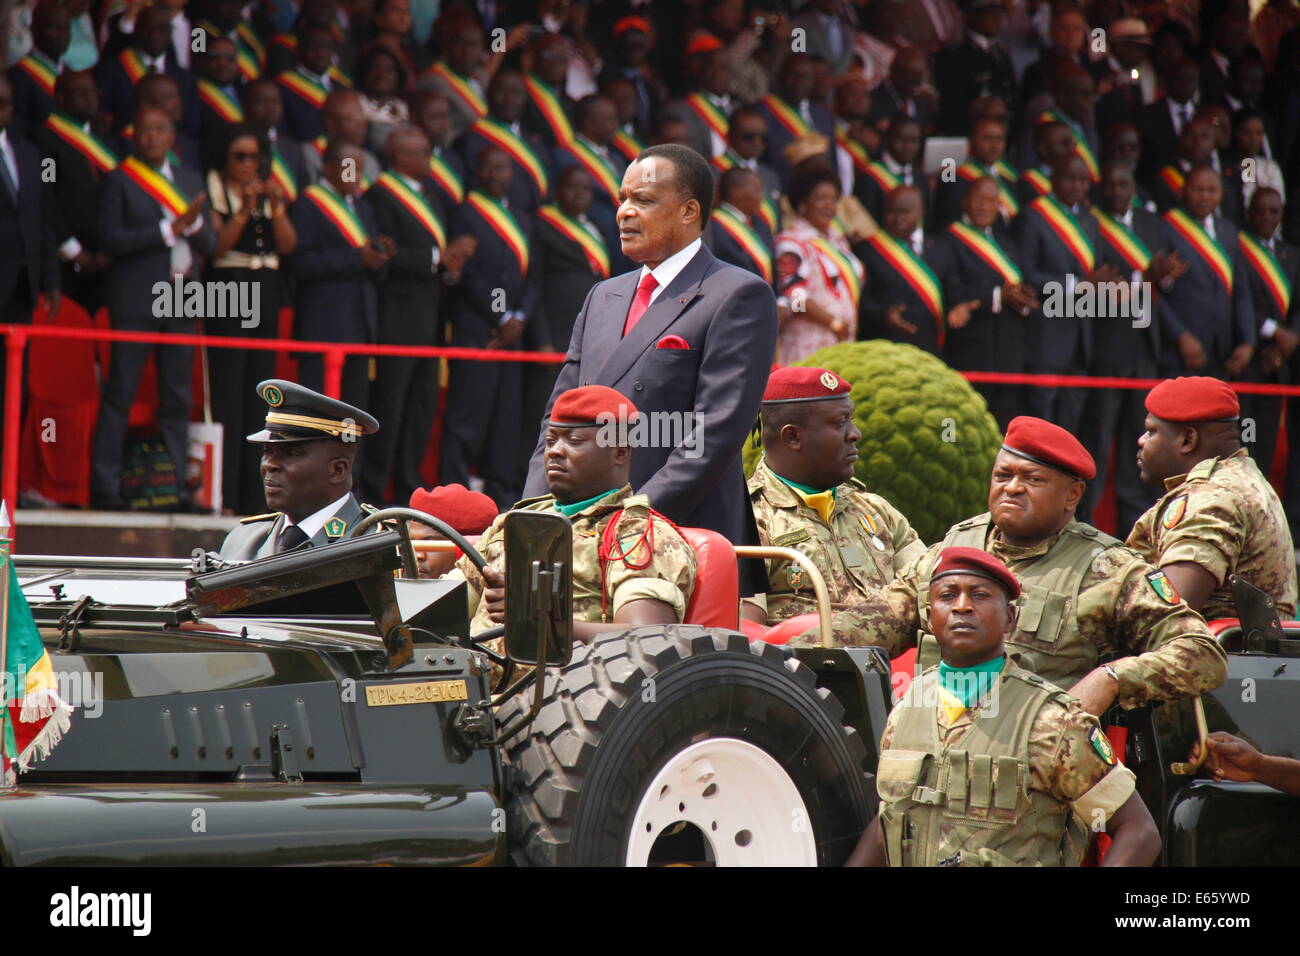 (140815) -- SIBITI (REPUBLIC OF CONGO), Aug. 15, 2014 (Xinhua) -- Republic of Congo's President Denis Sassou-Nguesso reviews the army during a celebration marking the 54th independence anniversary of the country in Sibiti, the Republic of Congo, Aug. 15, 2014. (Xinhua/Liu Kai) Stock Photo